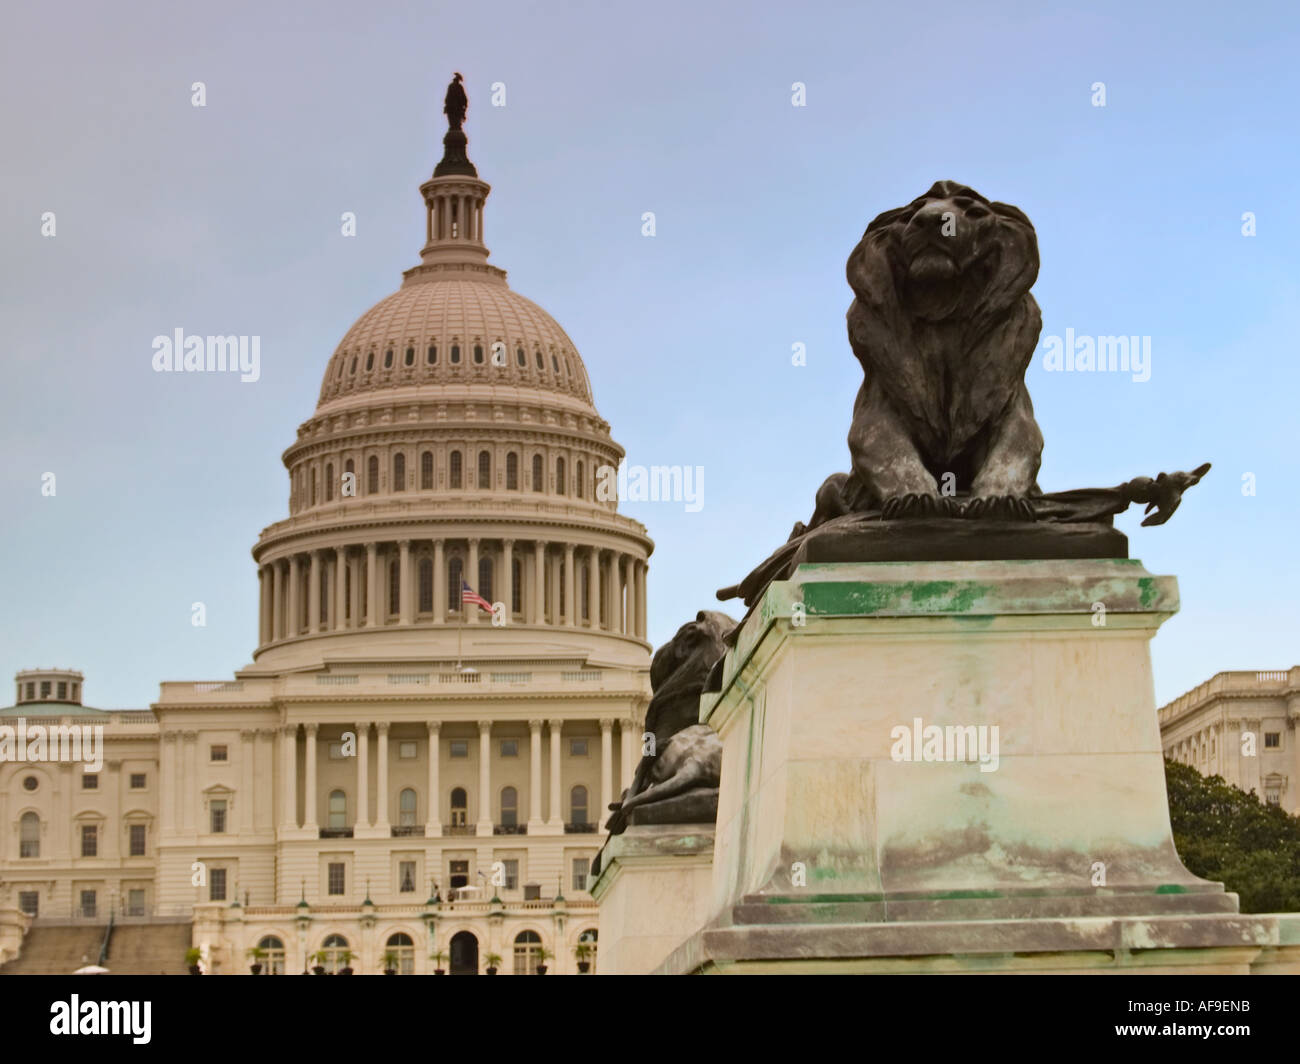 Lion statue in front of US Capitol Building, Washington DC Stock Photo